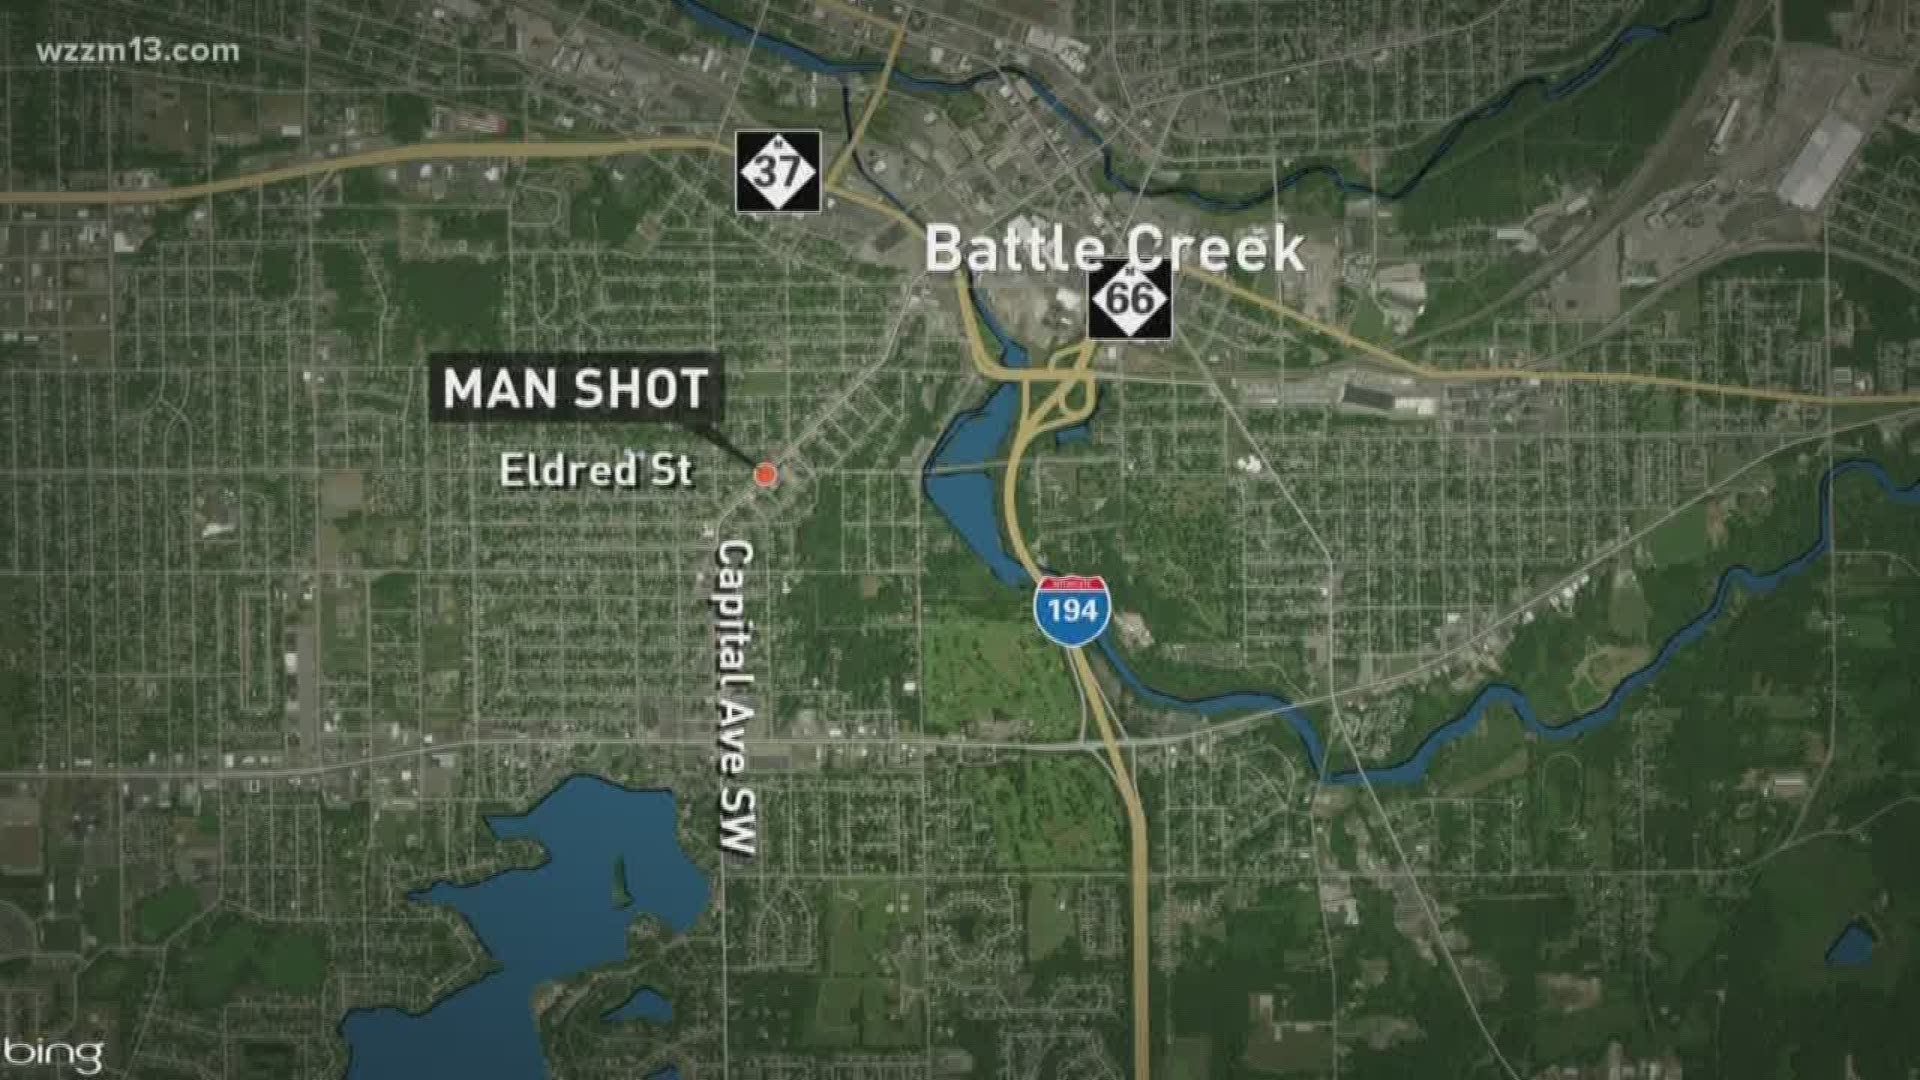 Police investigating overnight shooting in Battle Creek